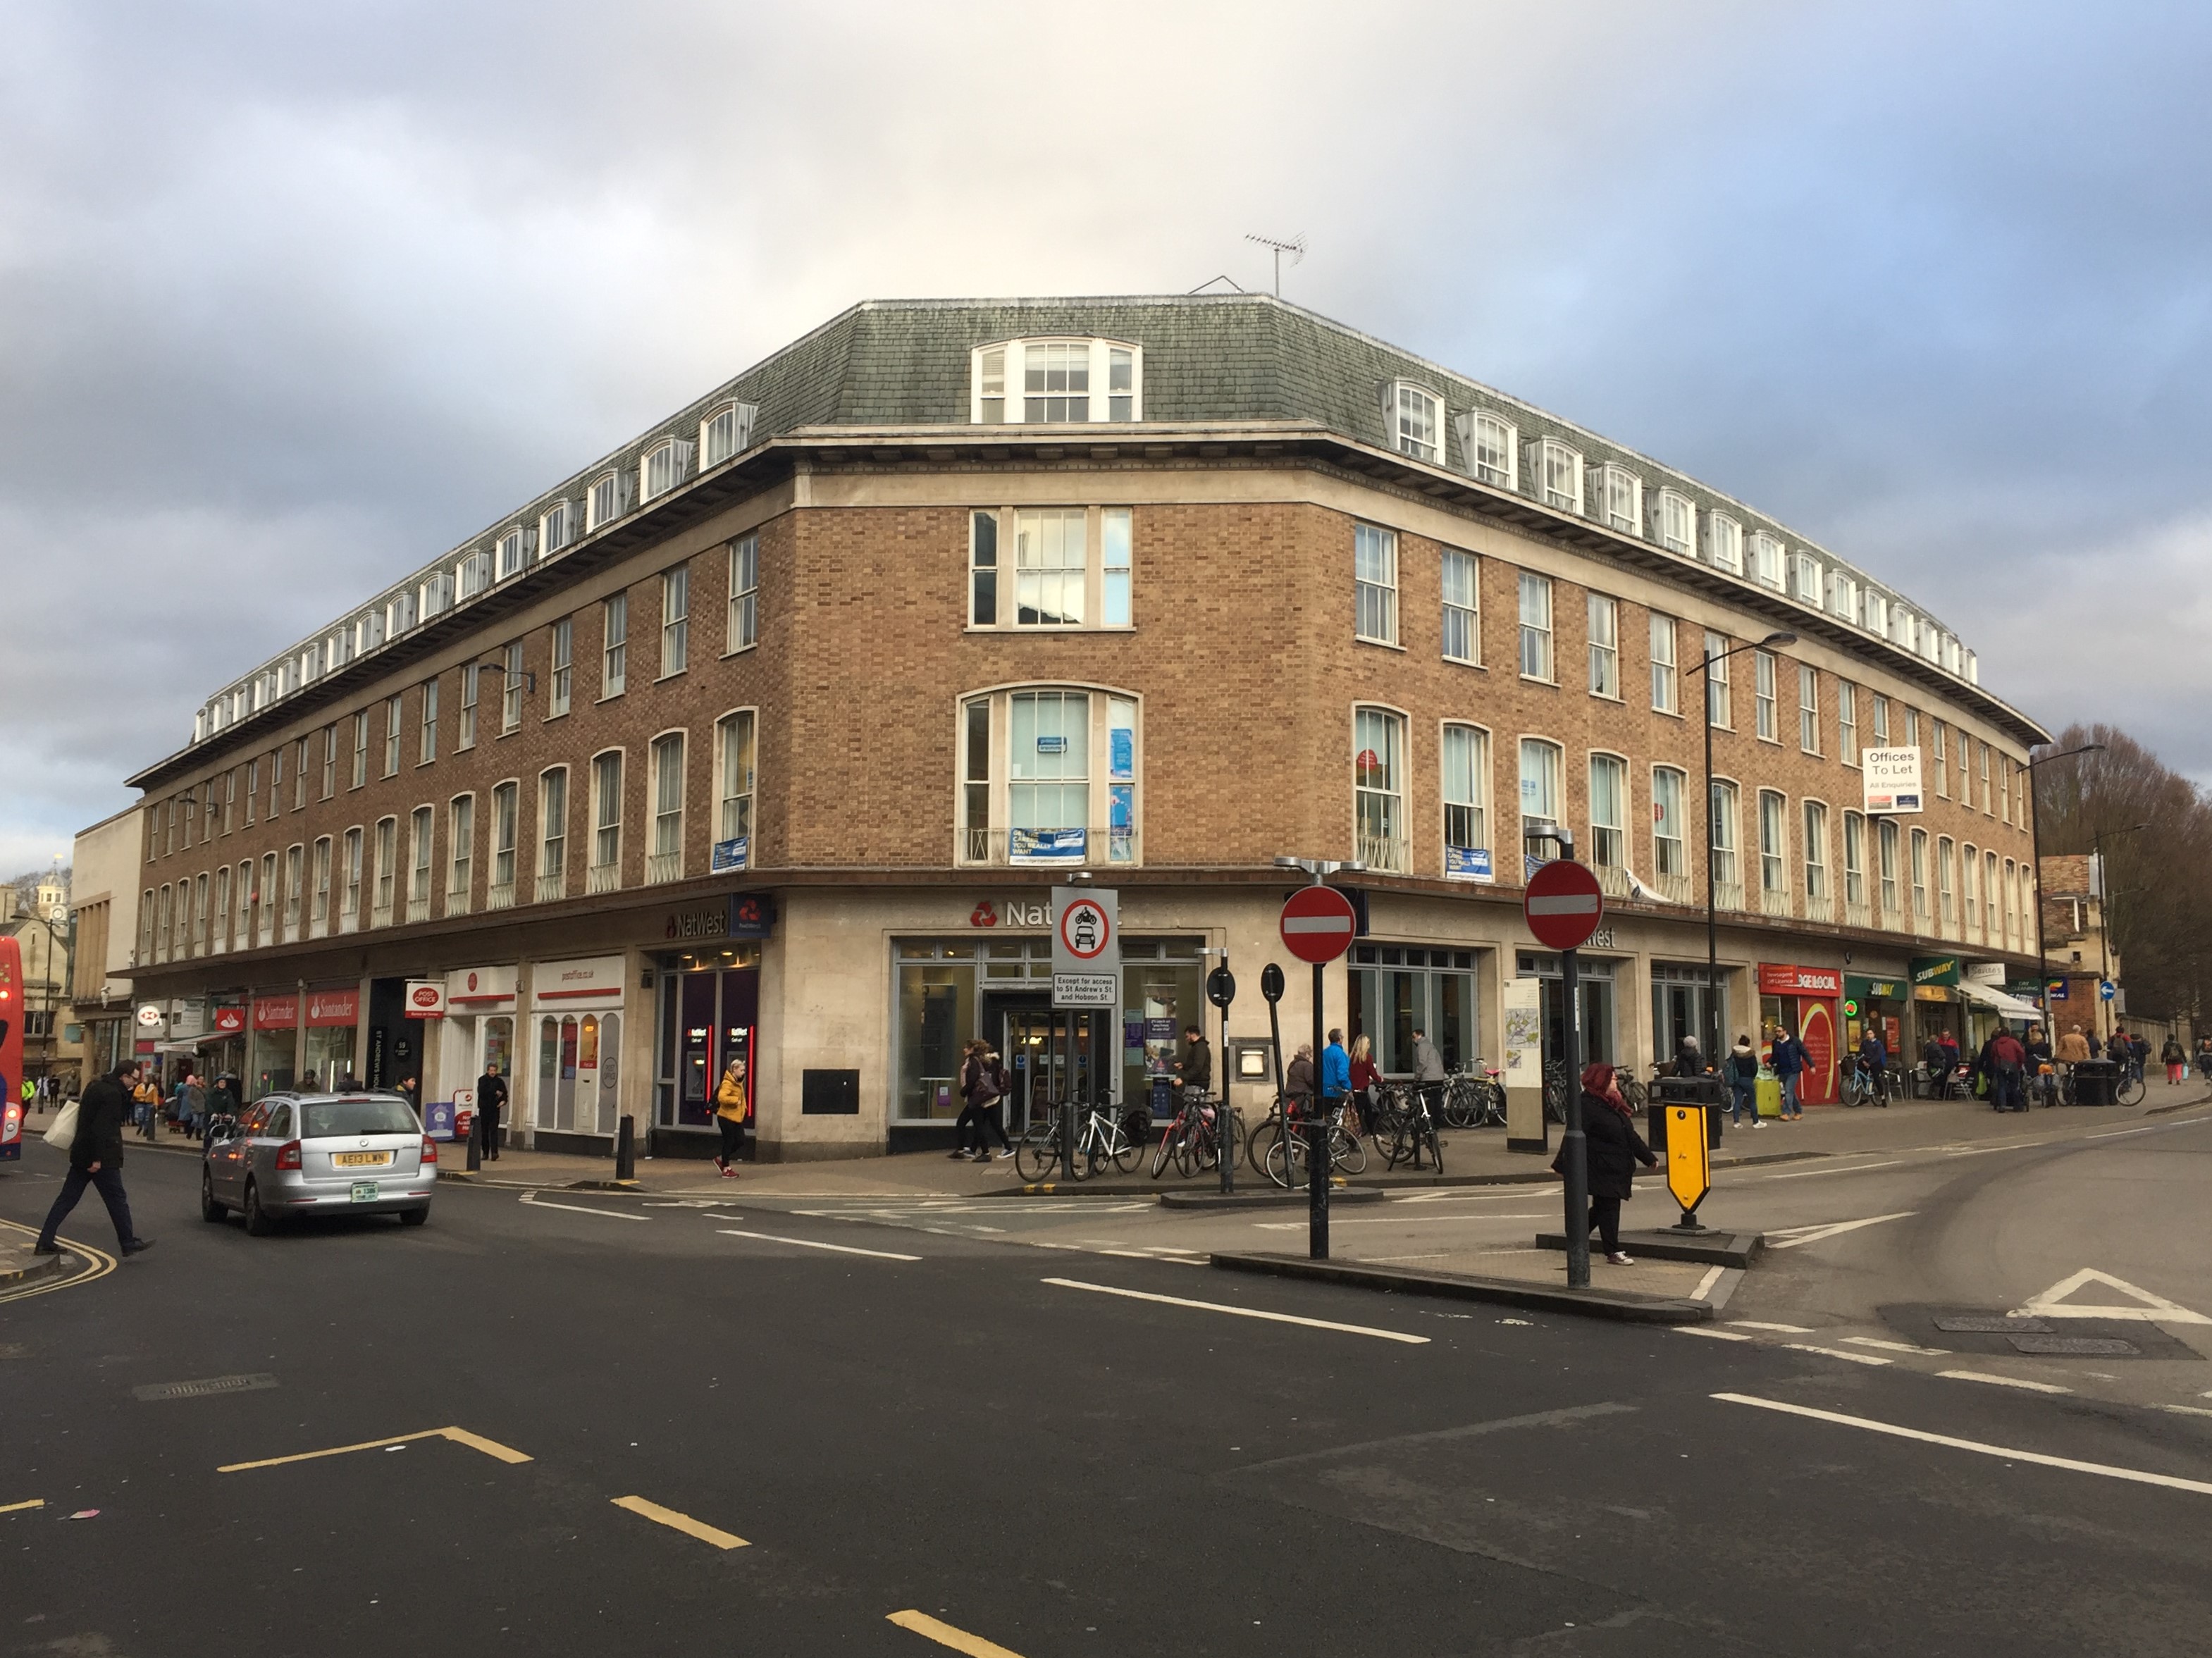 Acquisition of a rare city centre retail and office block